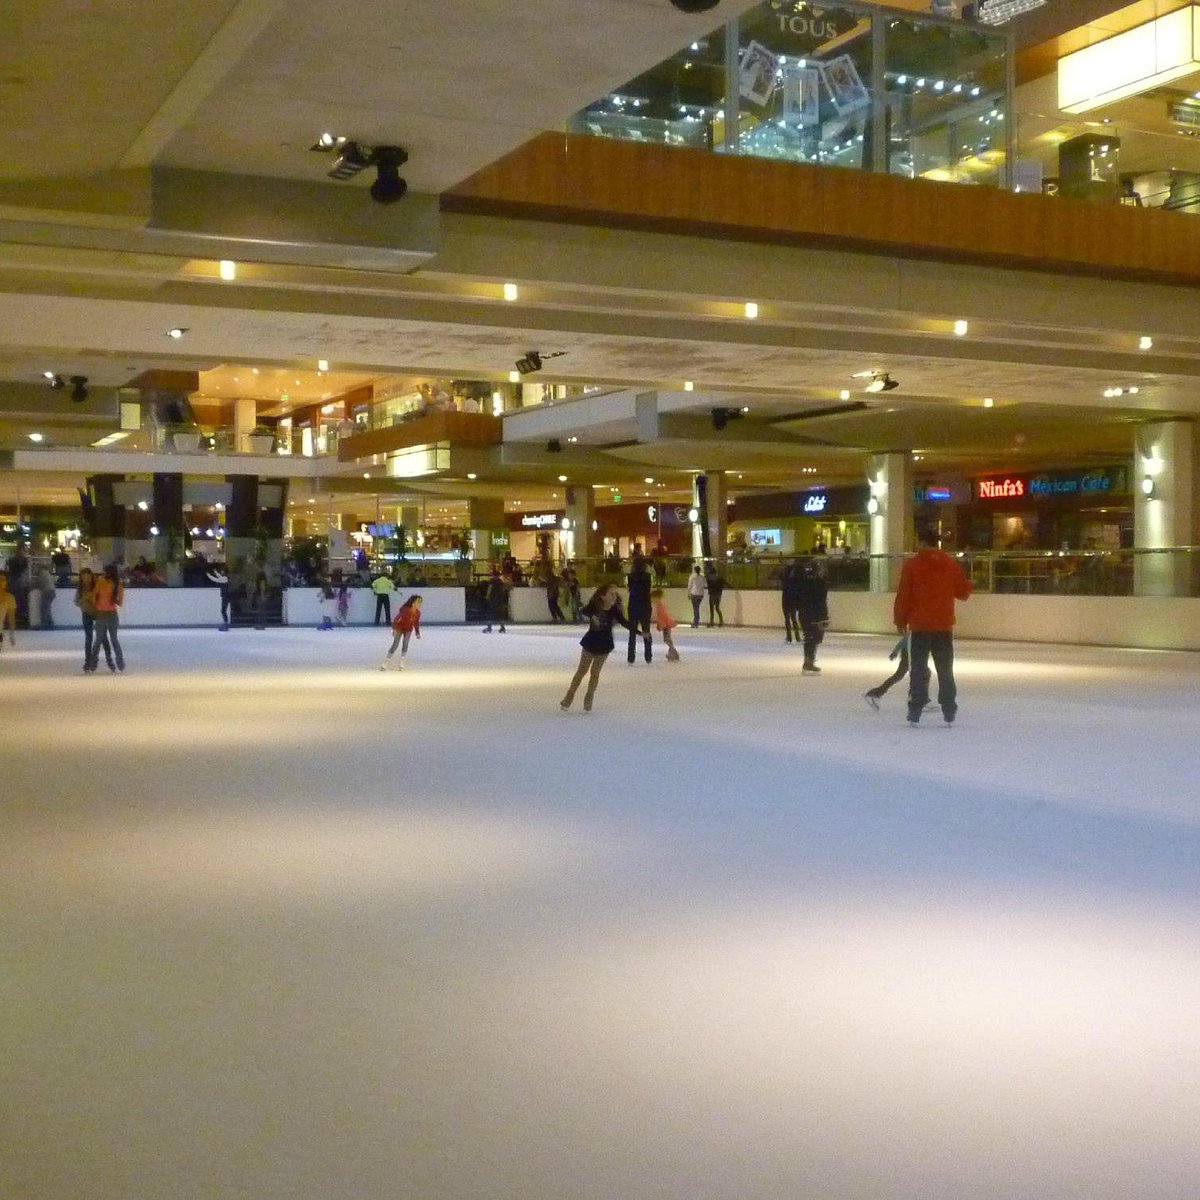 Ice skating rink at Galleria Mall in Houston Texas - Picture of